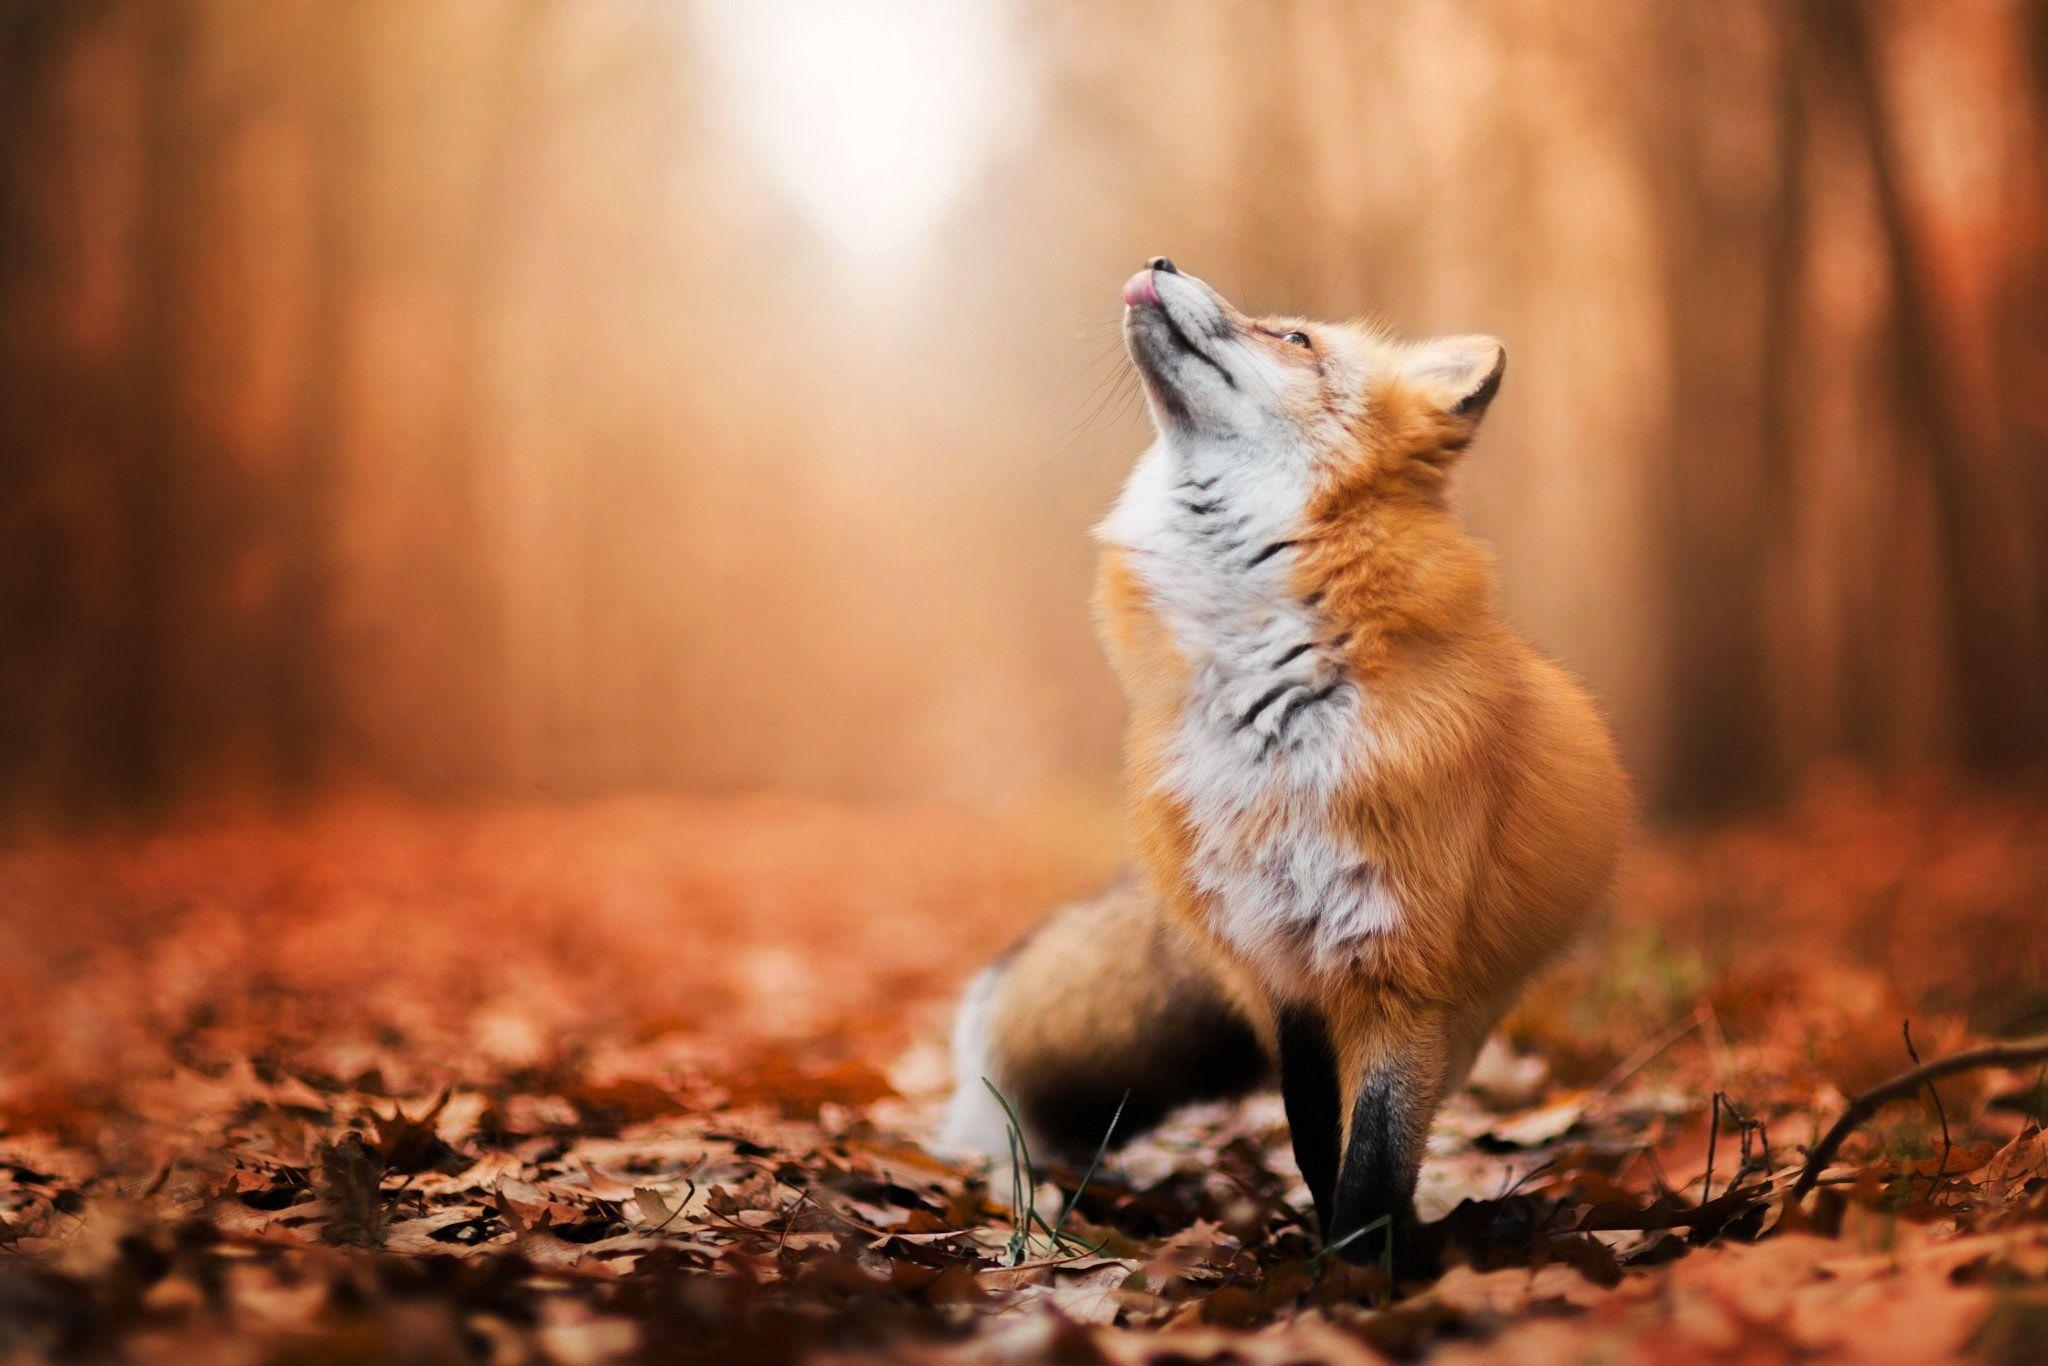 Autumn Animals Wallpapers Top Free Autumn Animals Backgrounds